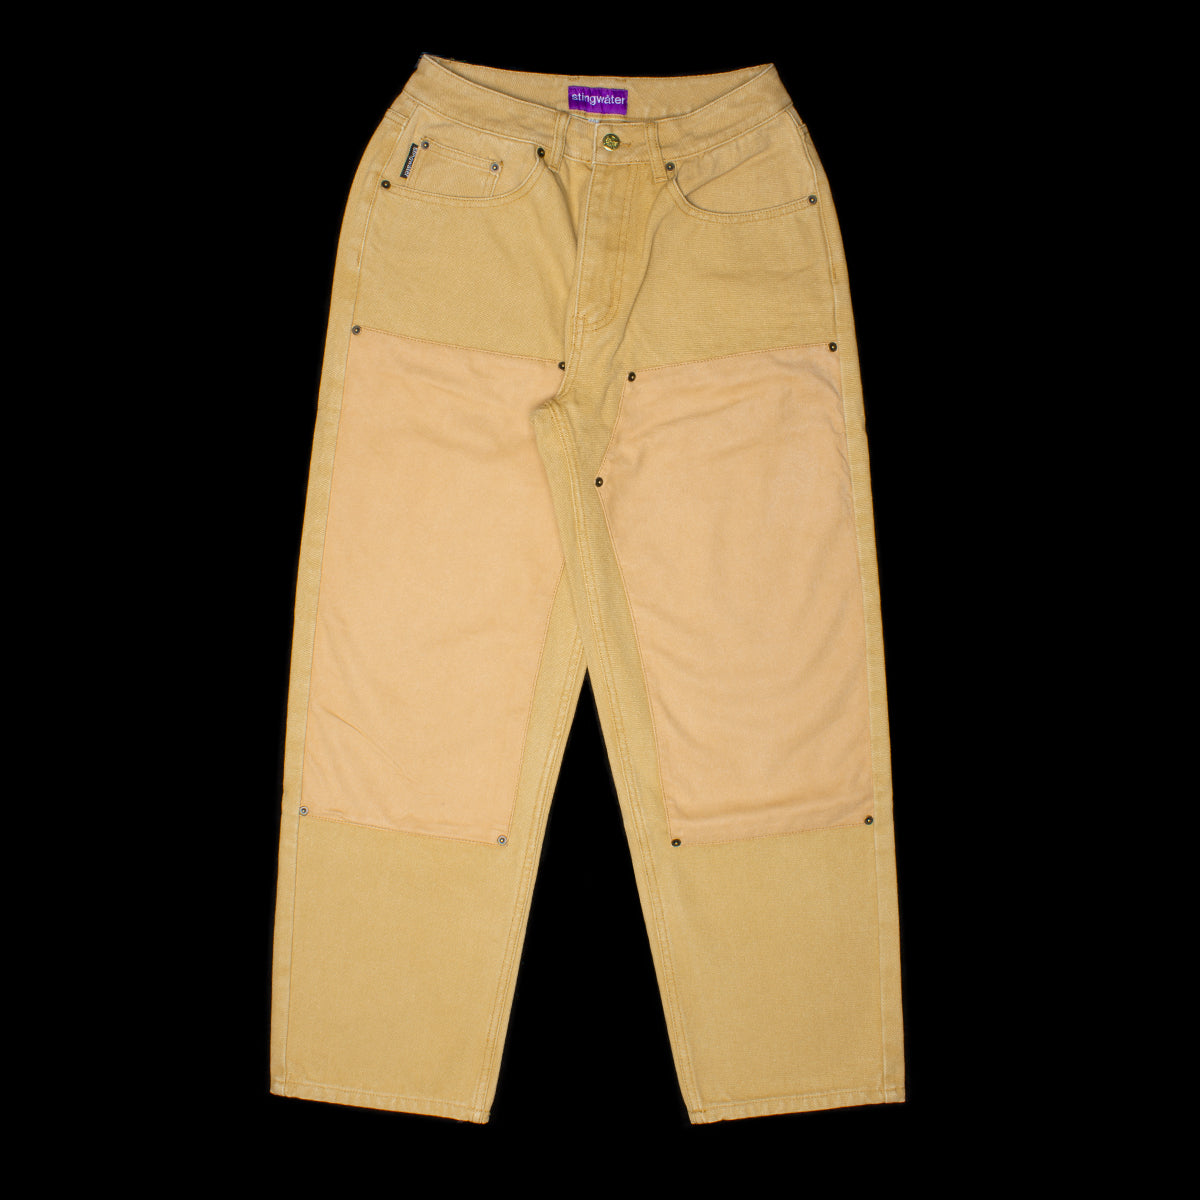 Stingwater Double Knee Pant